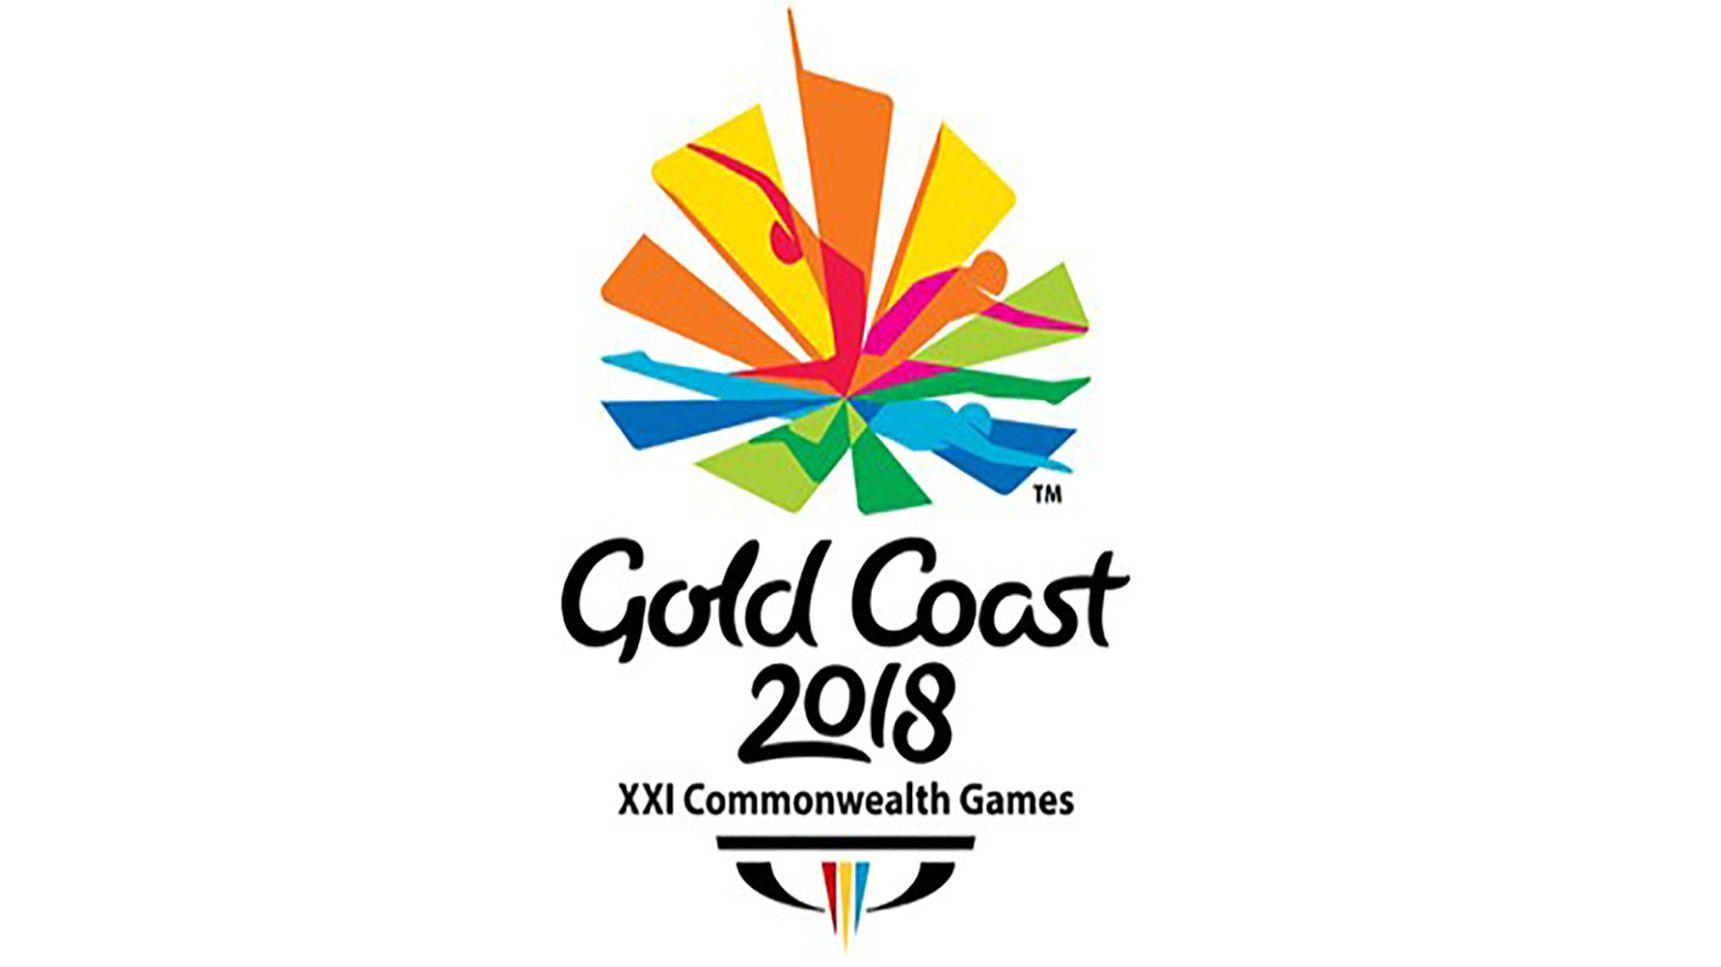 Commonwealth Logo - 2018 Commonwealth Games Schedules & Results | Northern Ireland ...